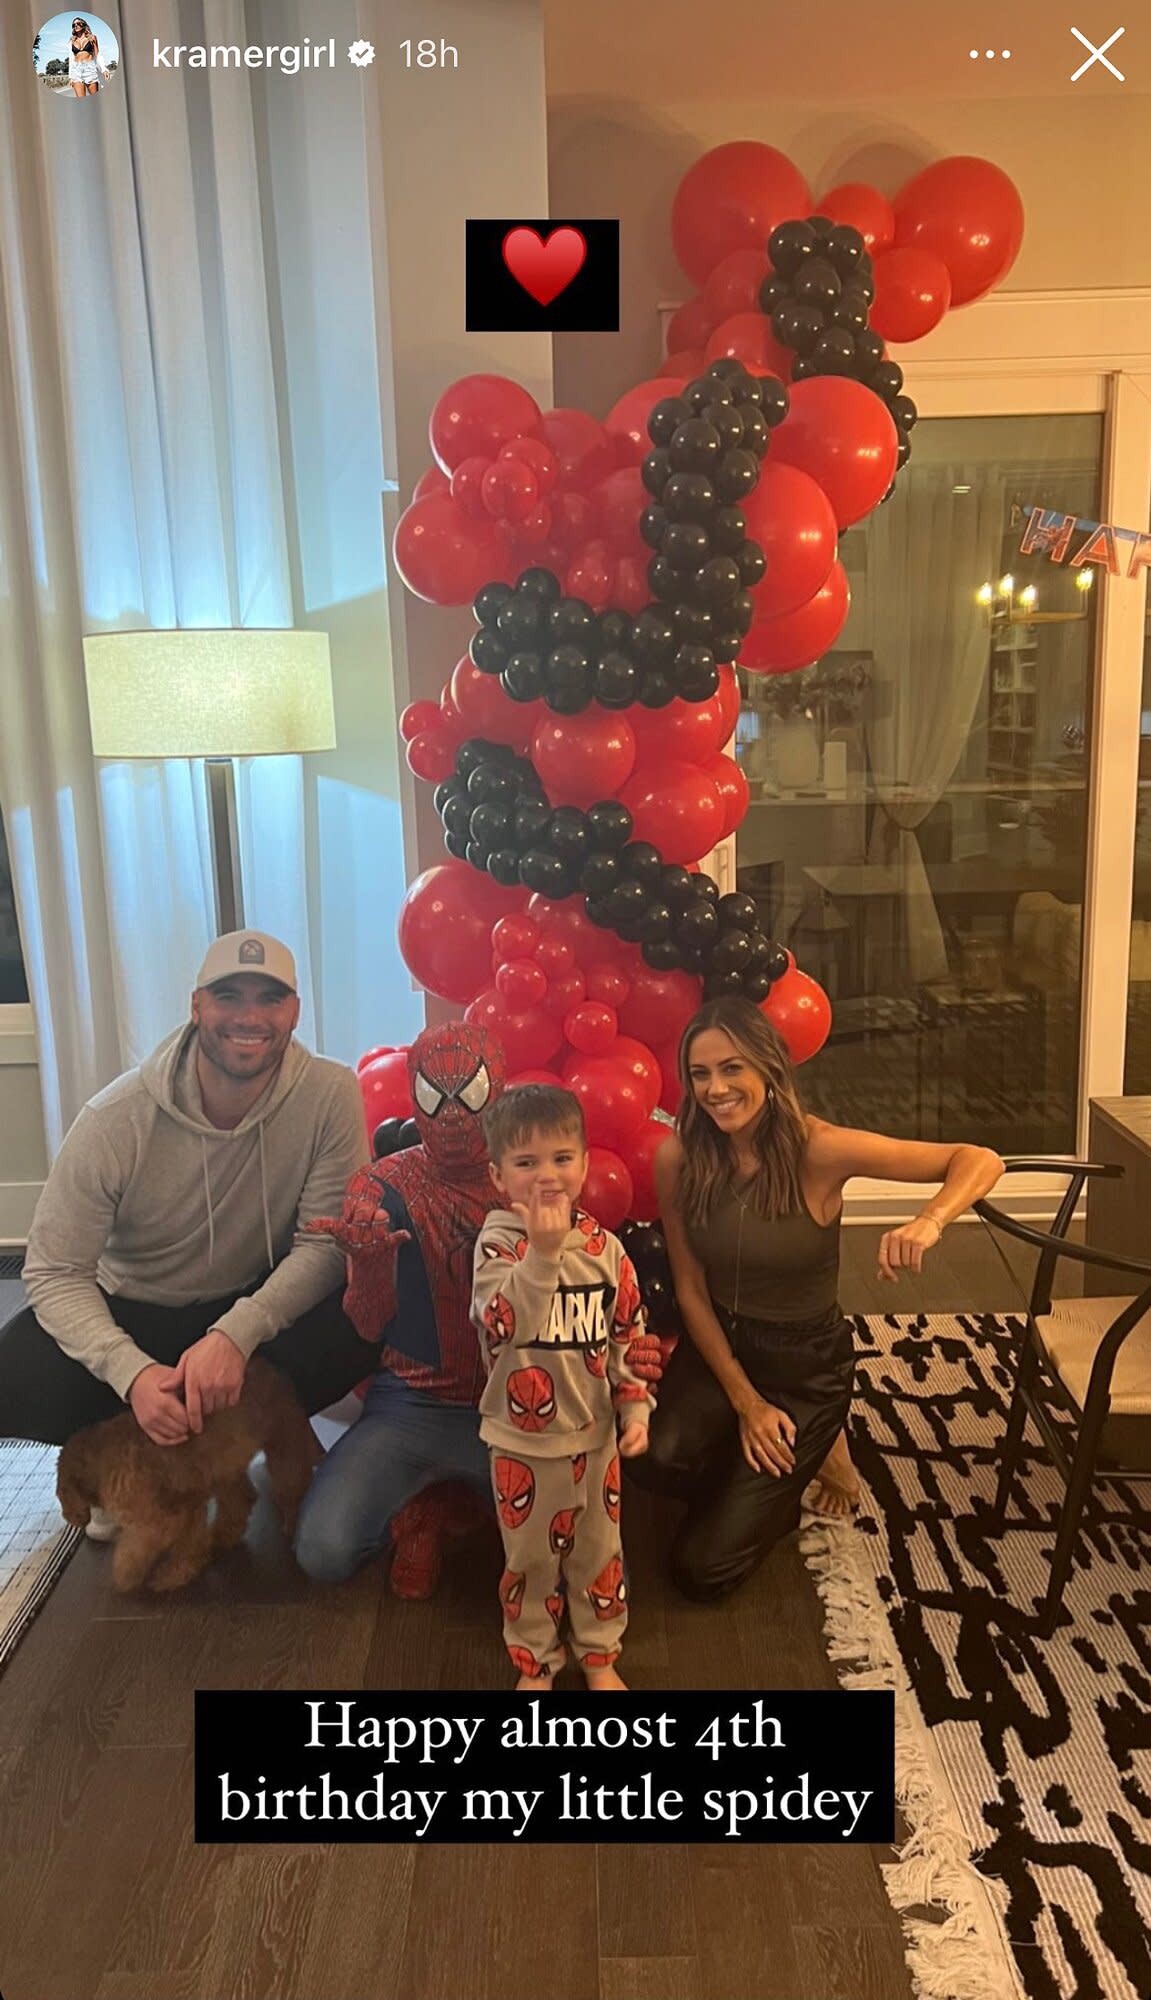 Jana Kramer and Mike Caussin Reunite for Son Jace's 4th Birthday: 'My Little Spidey'